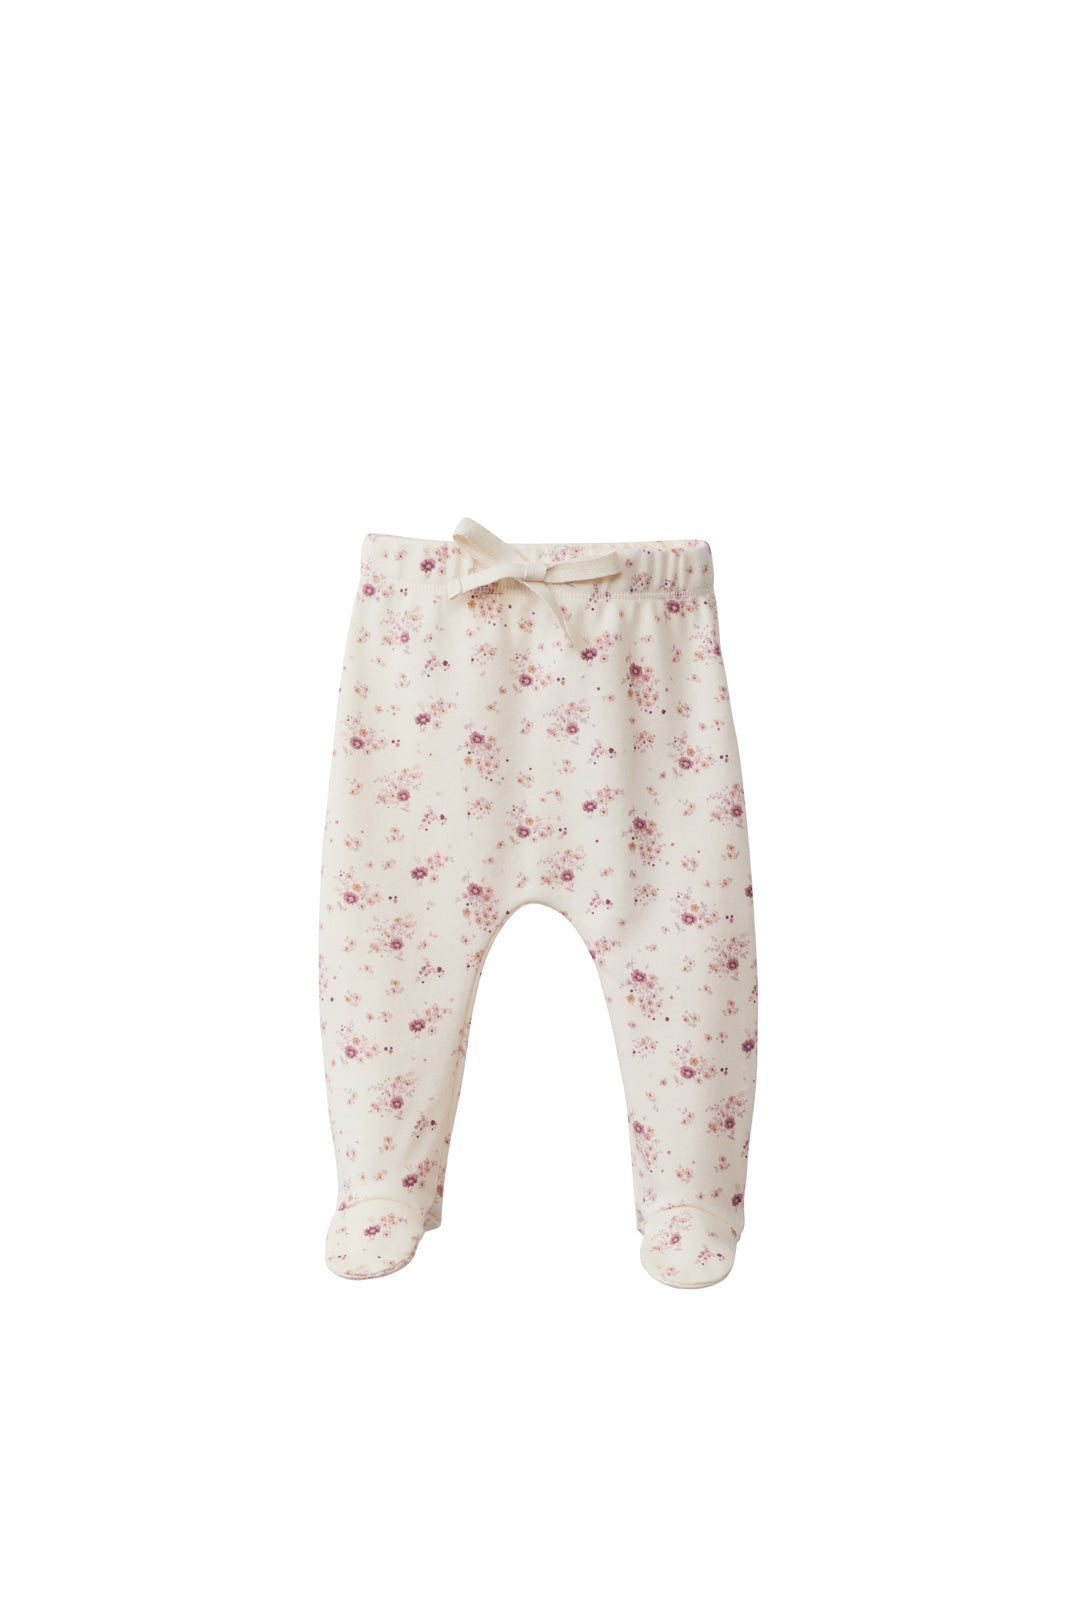 Organic Cotton Footed Pant - Forget Me Not Childrens Footed Pant from Jamie Kay USA